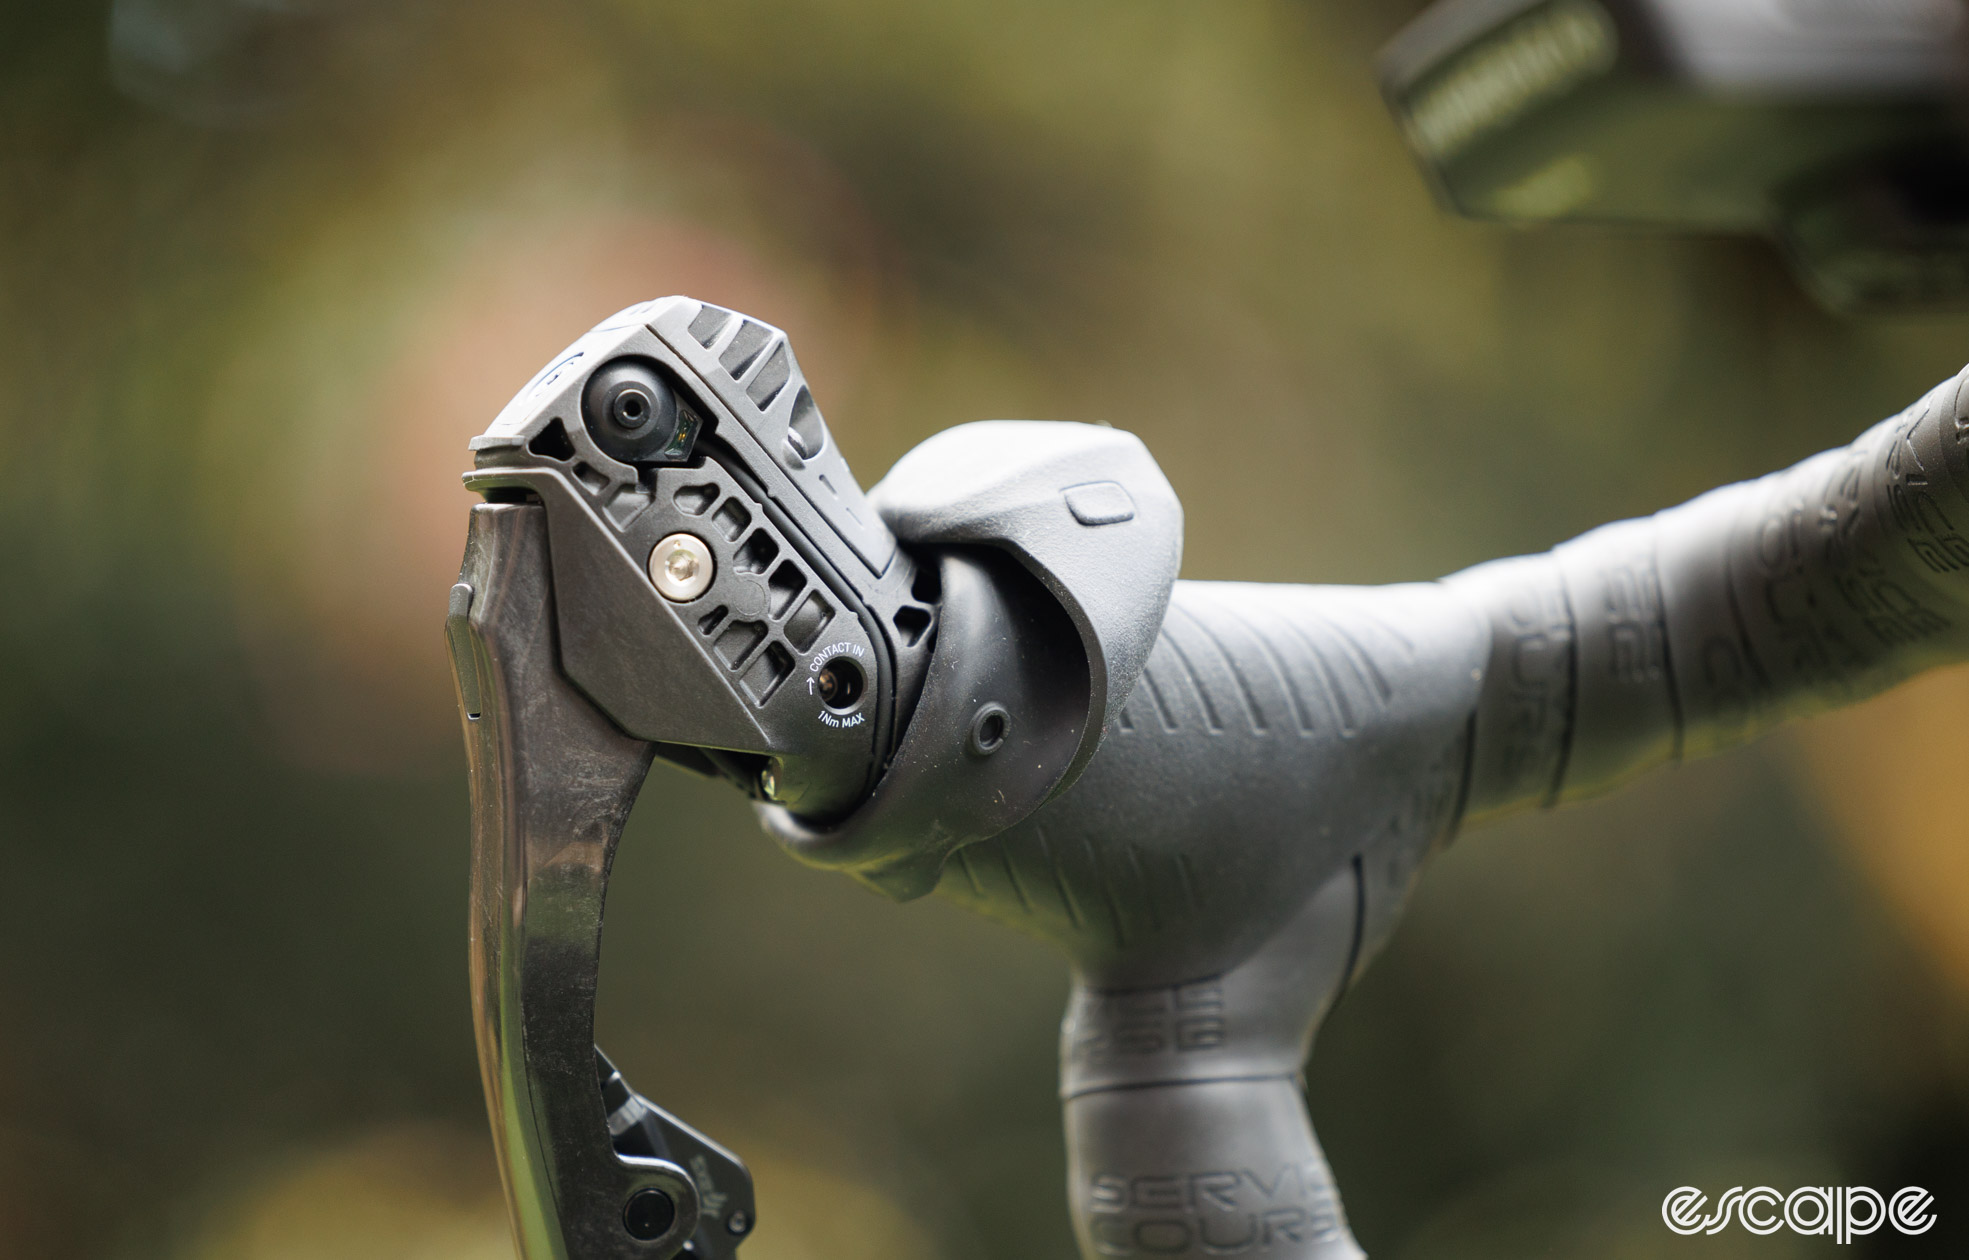  SRAM Red AXS shifter with the rubber hood peeled back to show the bonus button and contact point adjustment screw. 